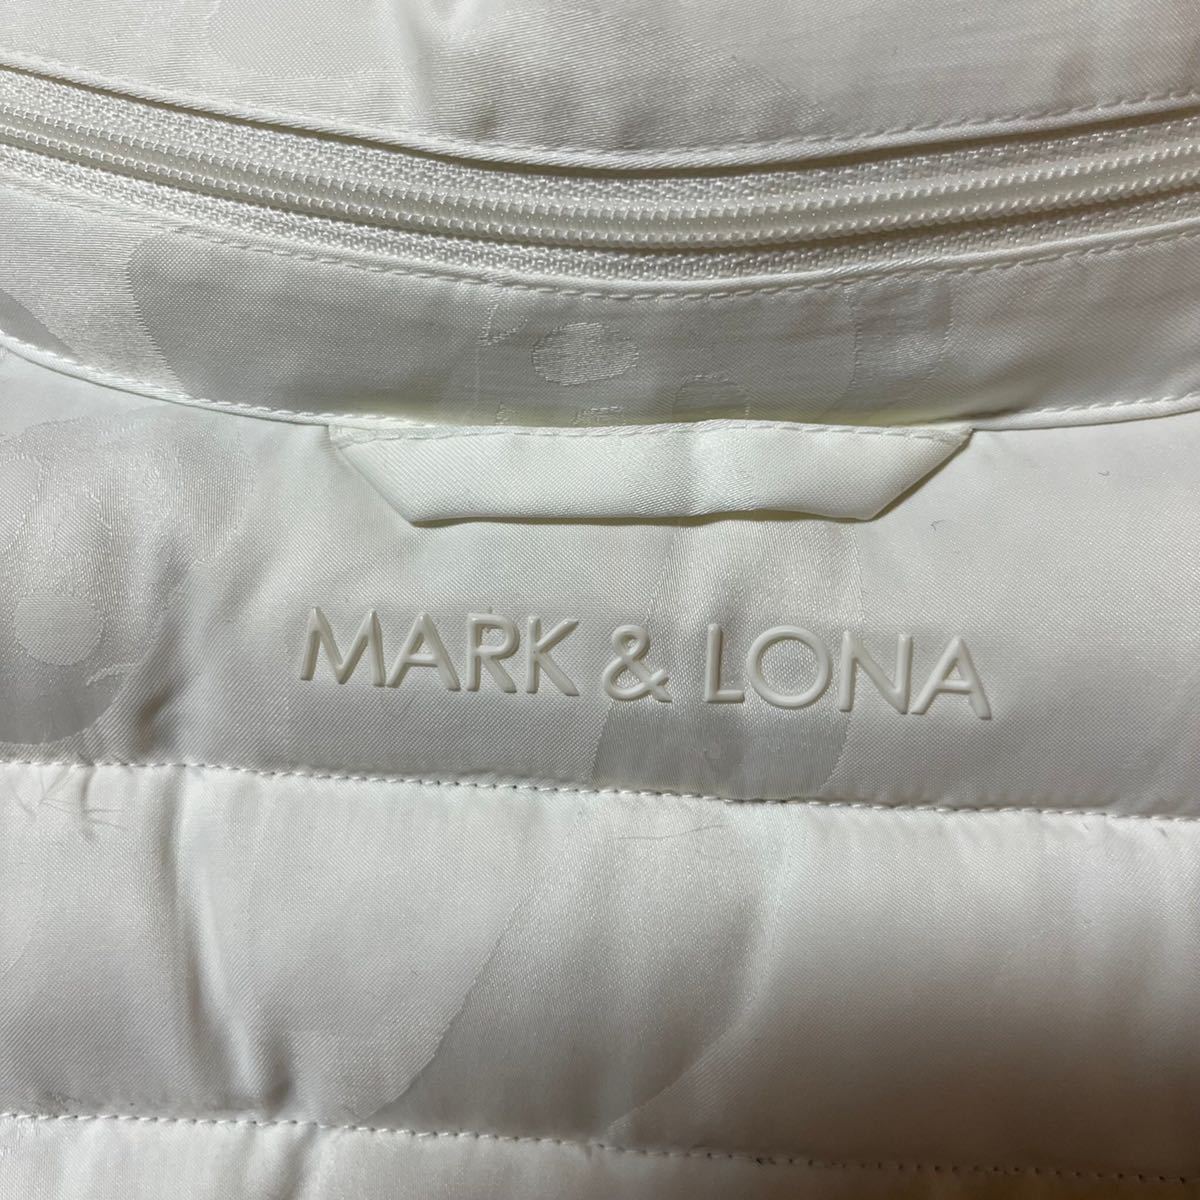 [MARK &RONA] Mark and rona down jacket lady's white Skull pattern camouflage pattern with a hood . free shipping! with translation 